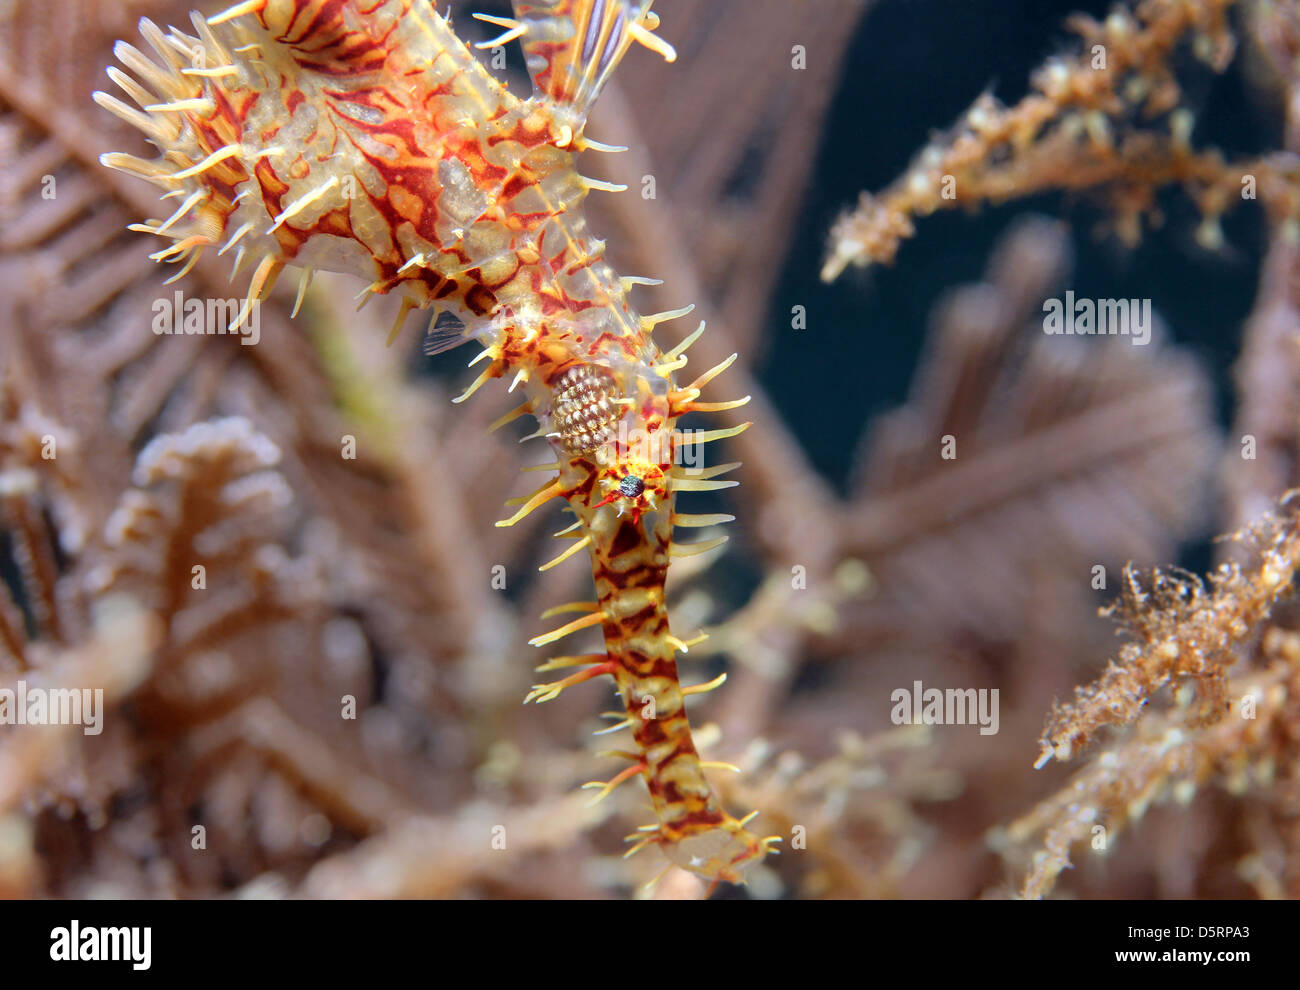 Close-up of a Harlequin Ghost Pipefish (Solenostomus Paradoxus), Lembeh Strait, Indonesia Stock Photo